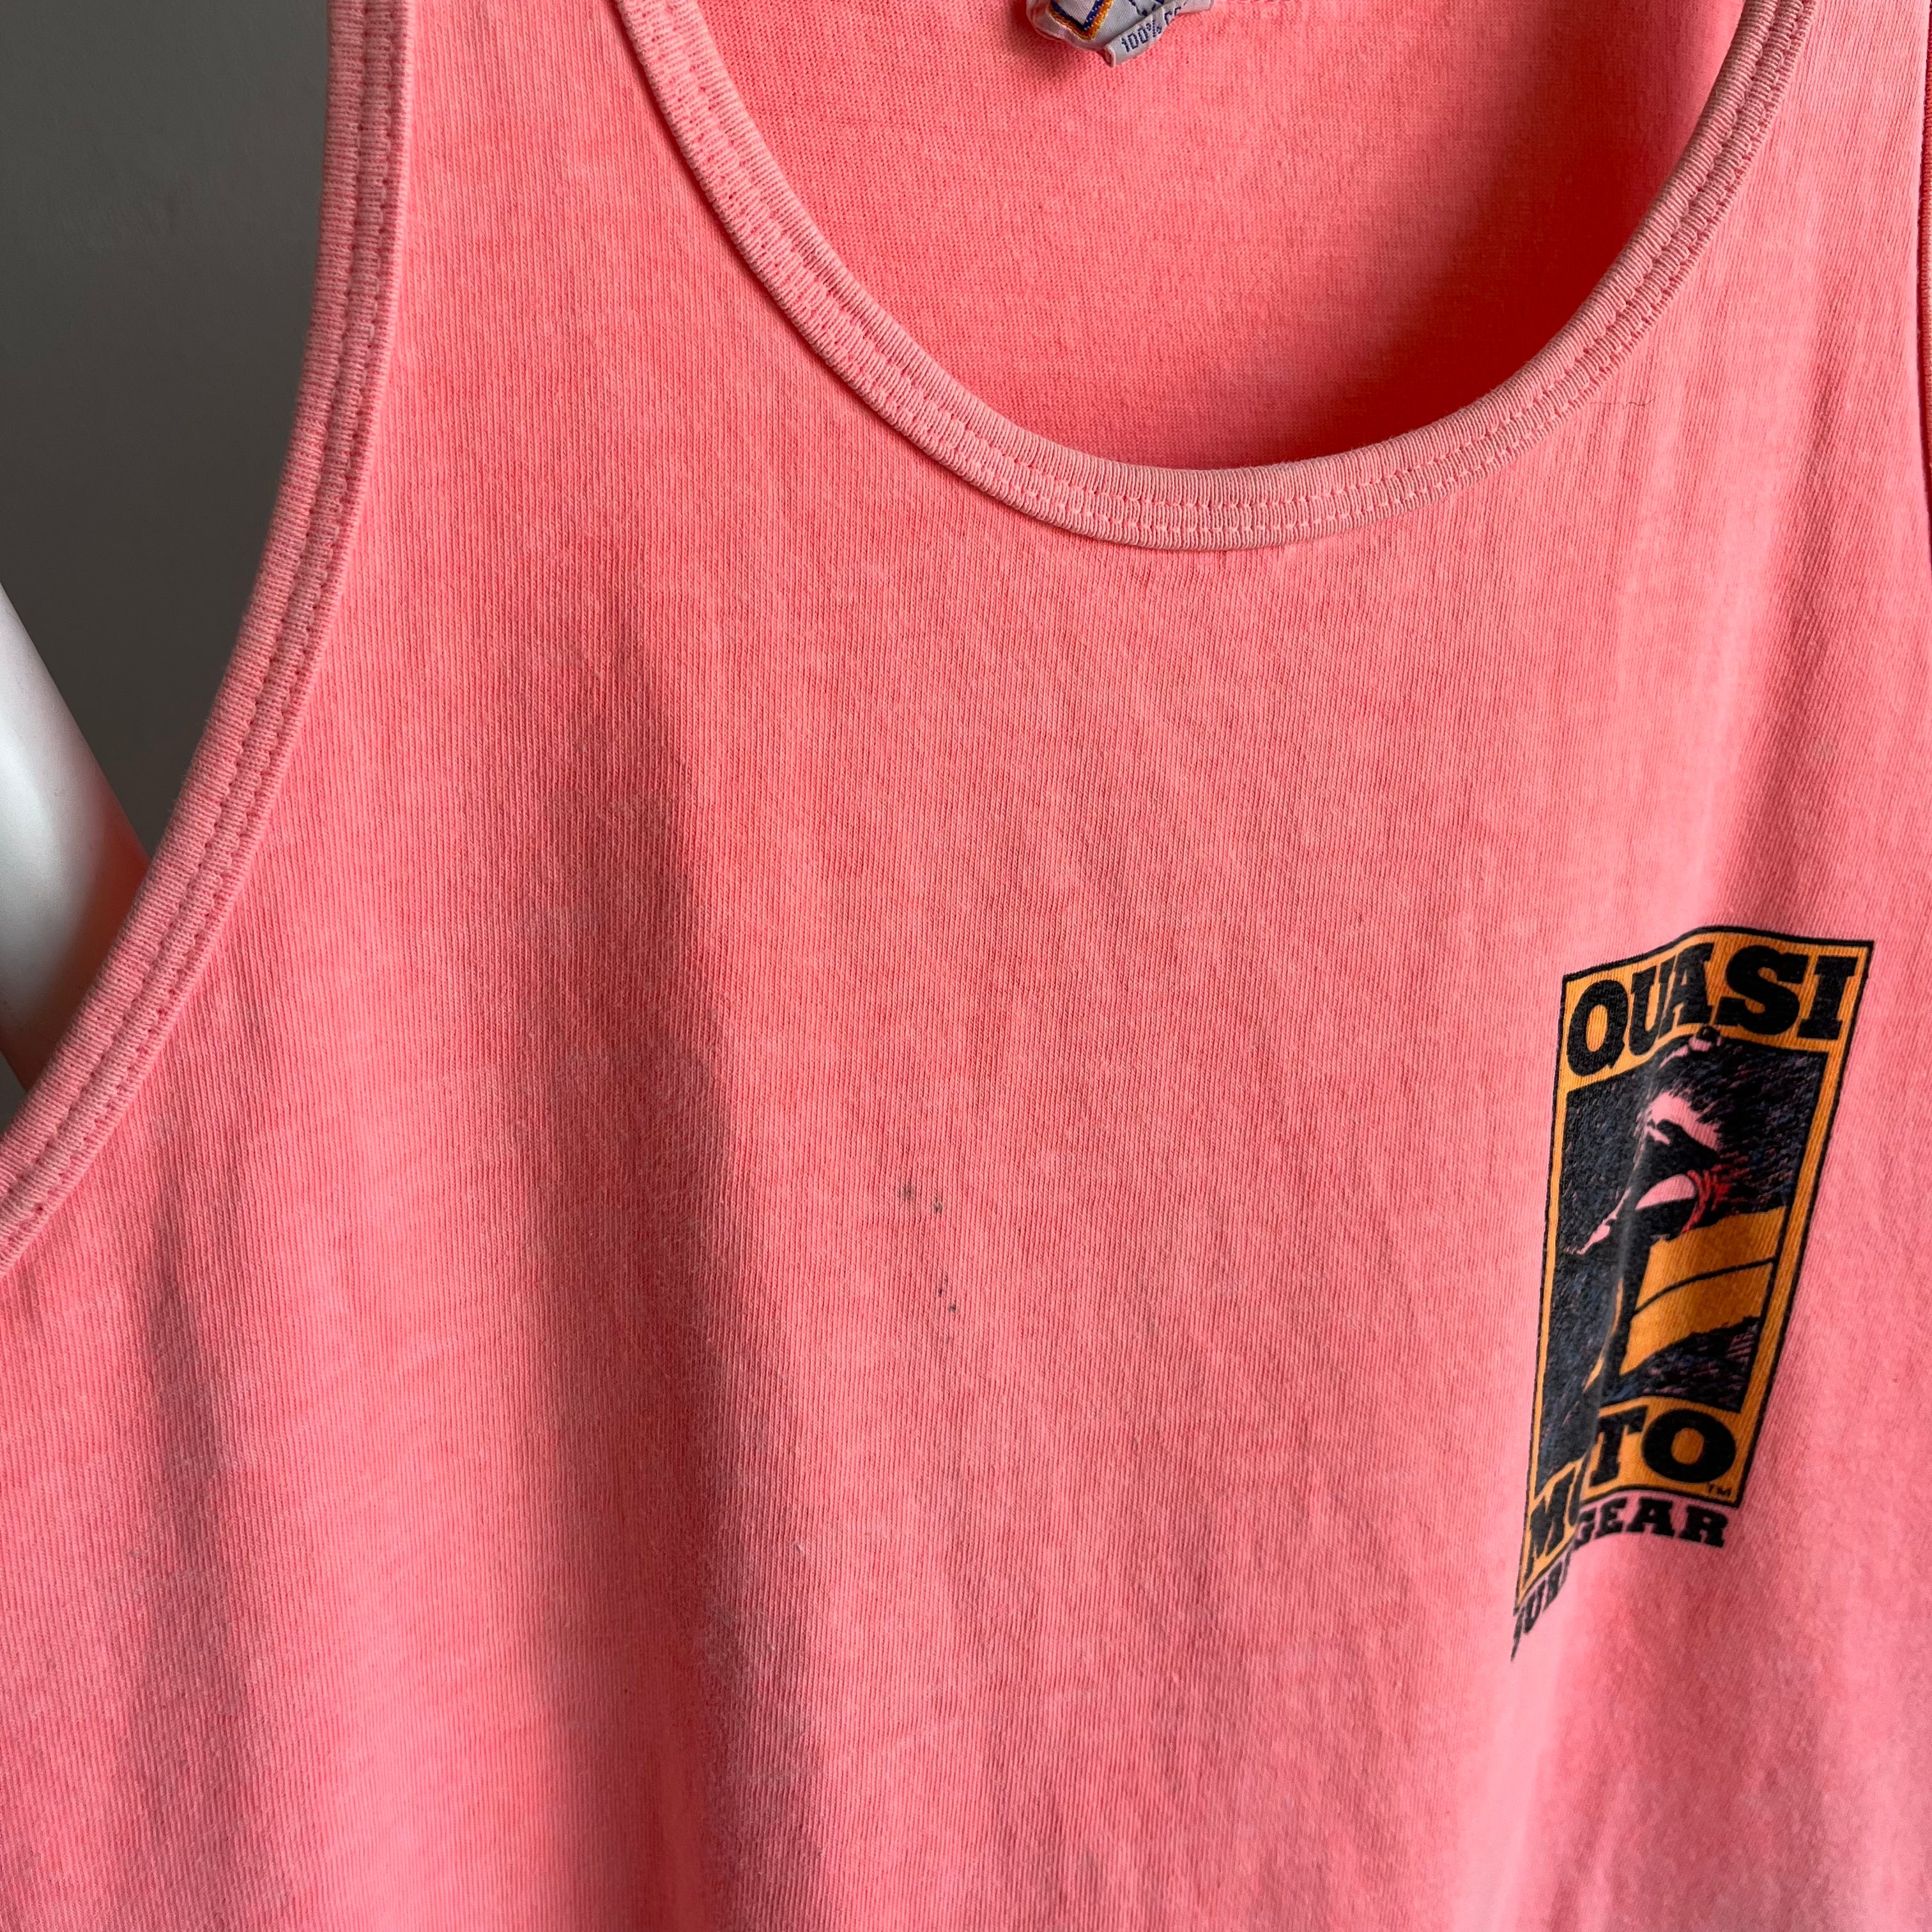 1980s Faded Neon Quasi Moto Surf Gear on a Crazy Shirts Tank